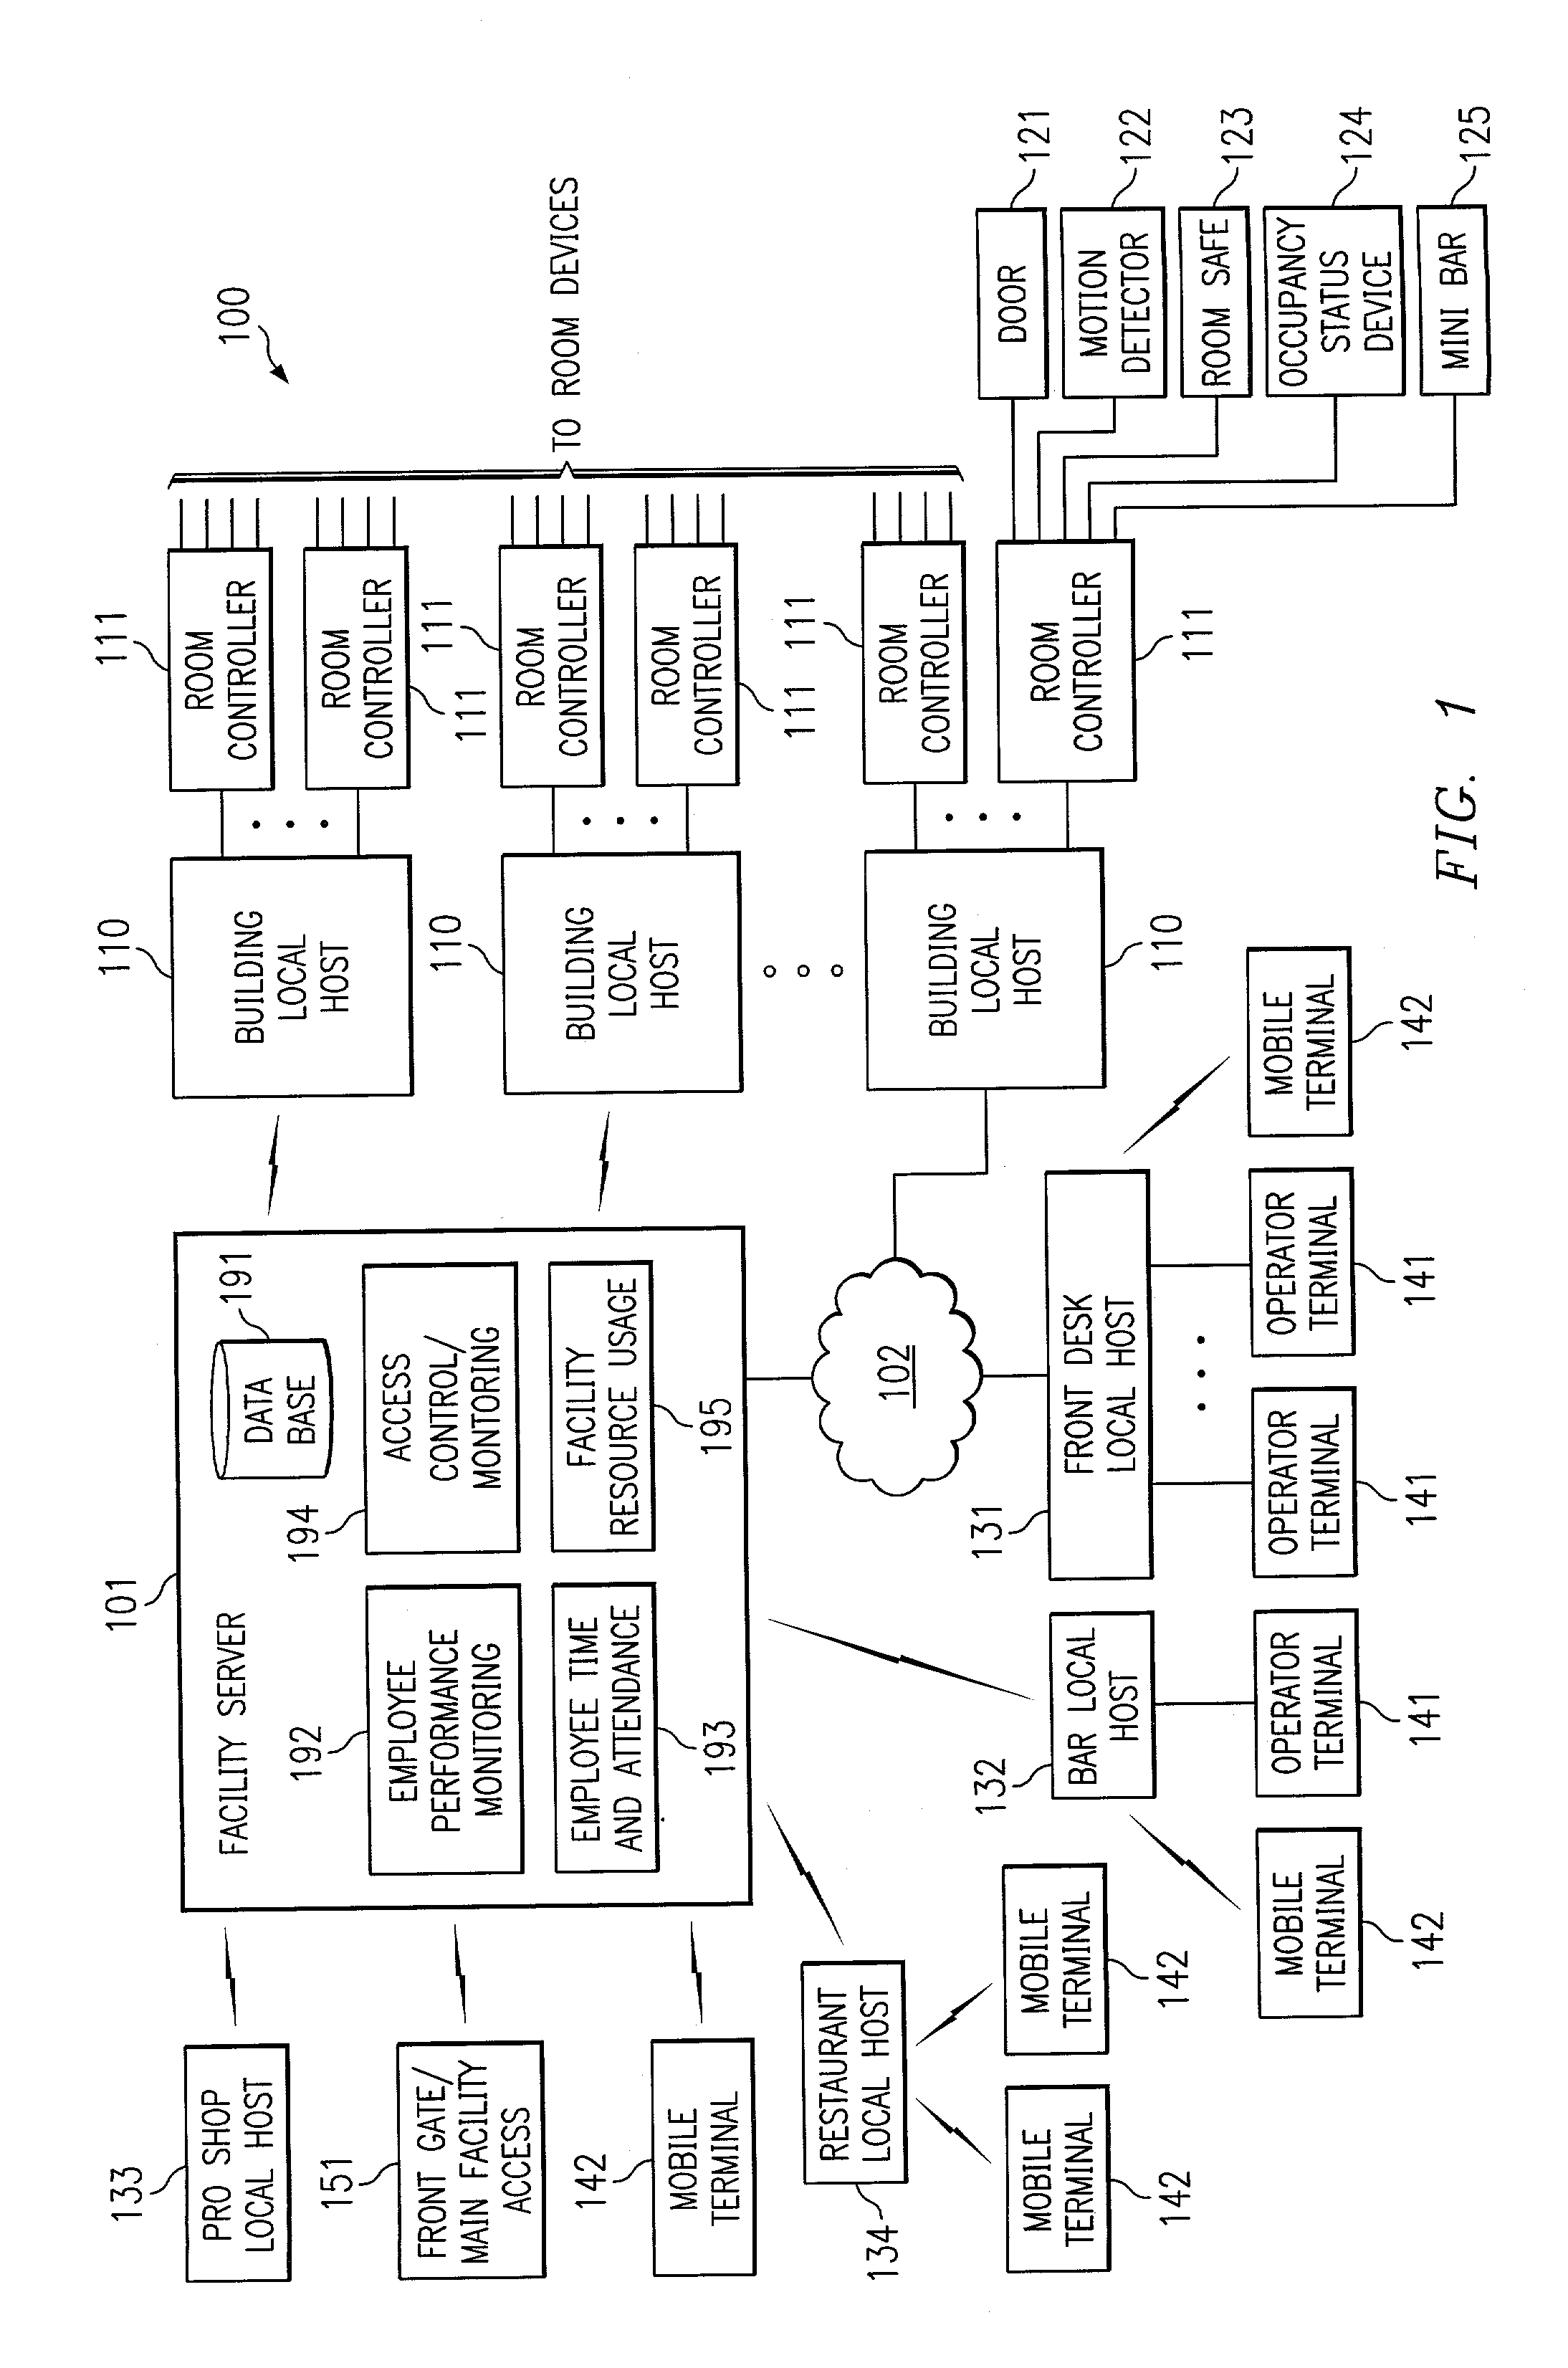 System and method for using biometric data for providing identification, security, access and access records